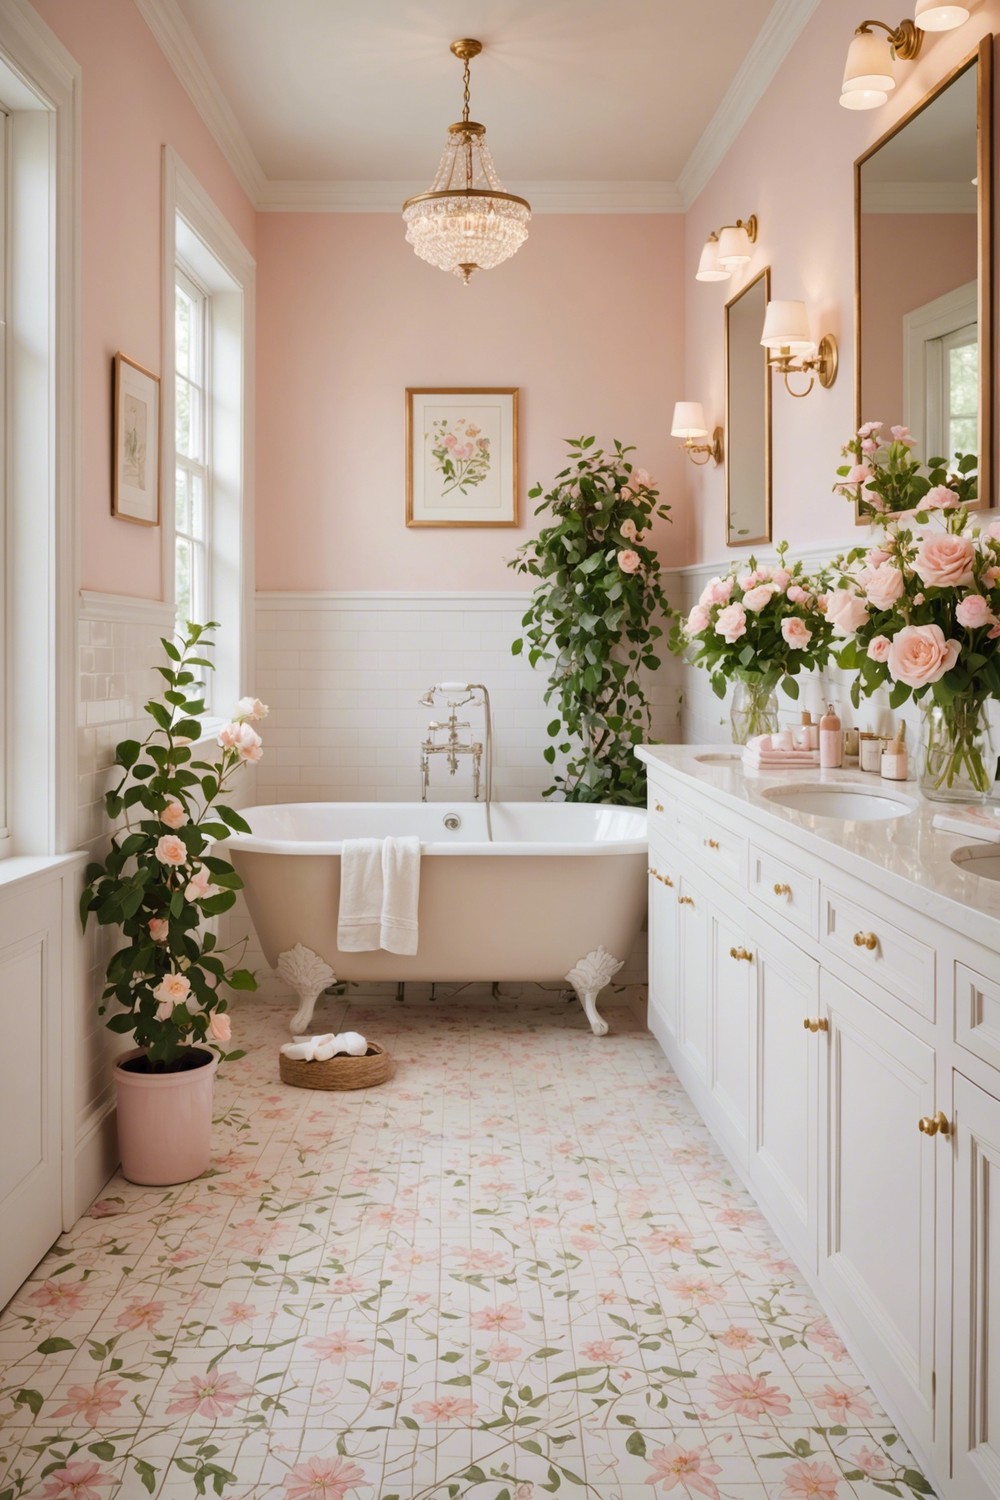 Delicate Floral Patterns on the Flooring